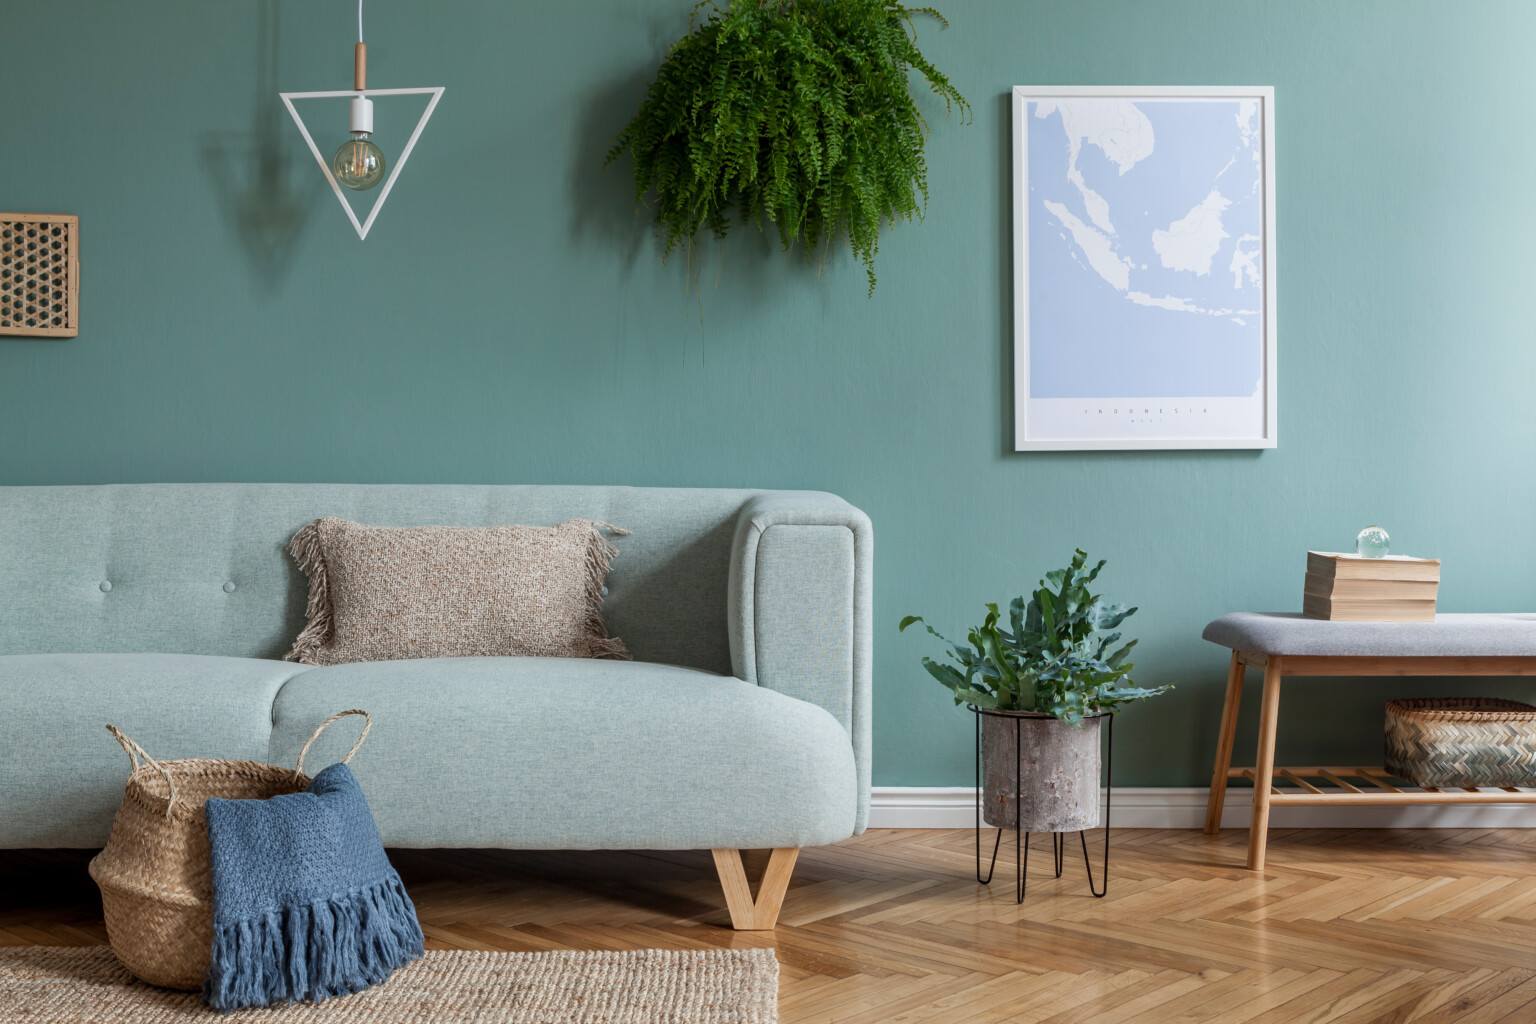 Mint Green Living Room Ideas For A Quick Room Refresh - Décor Aid